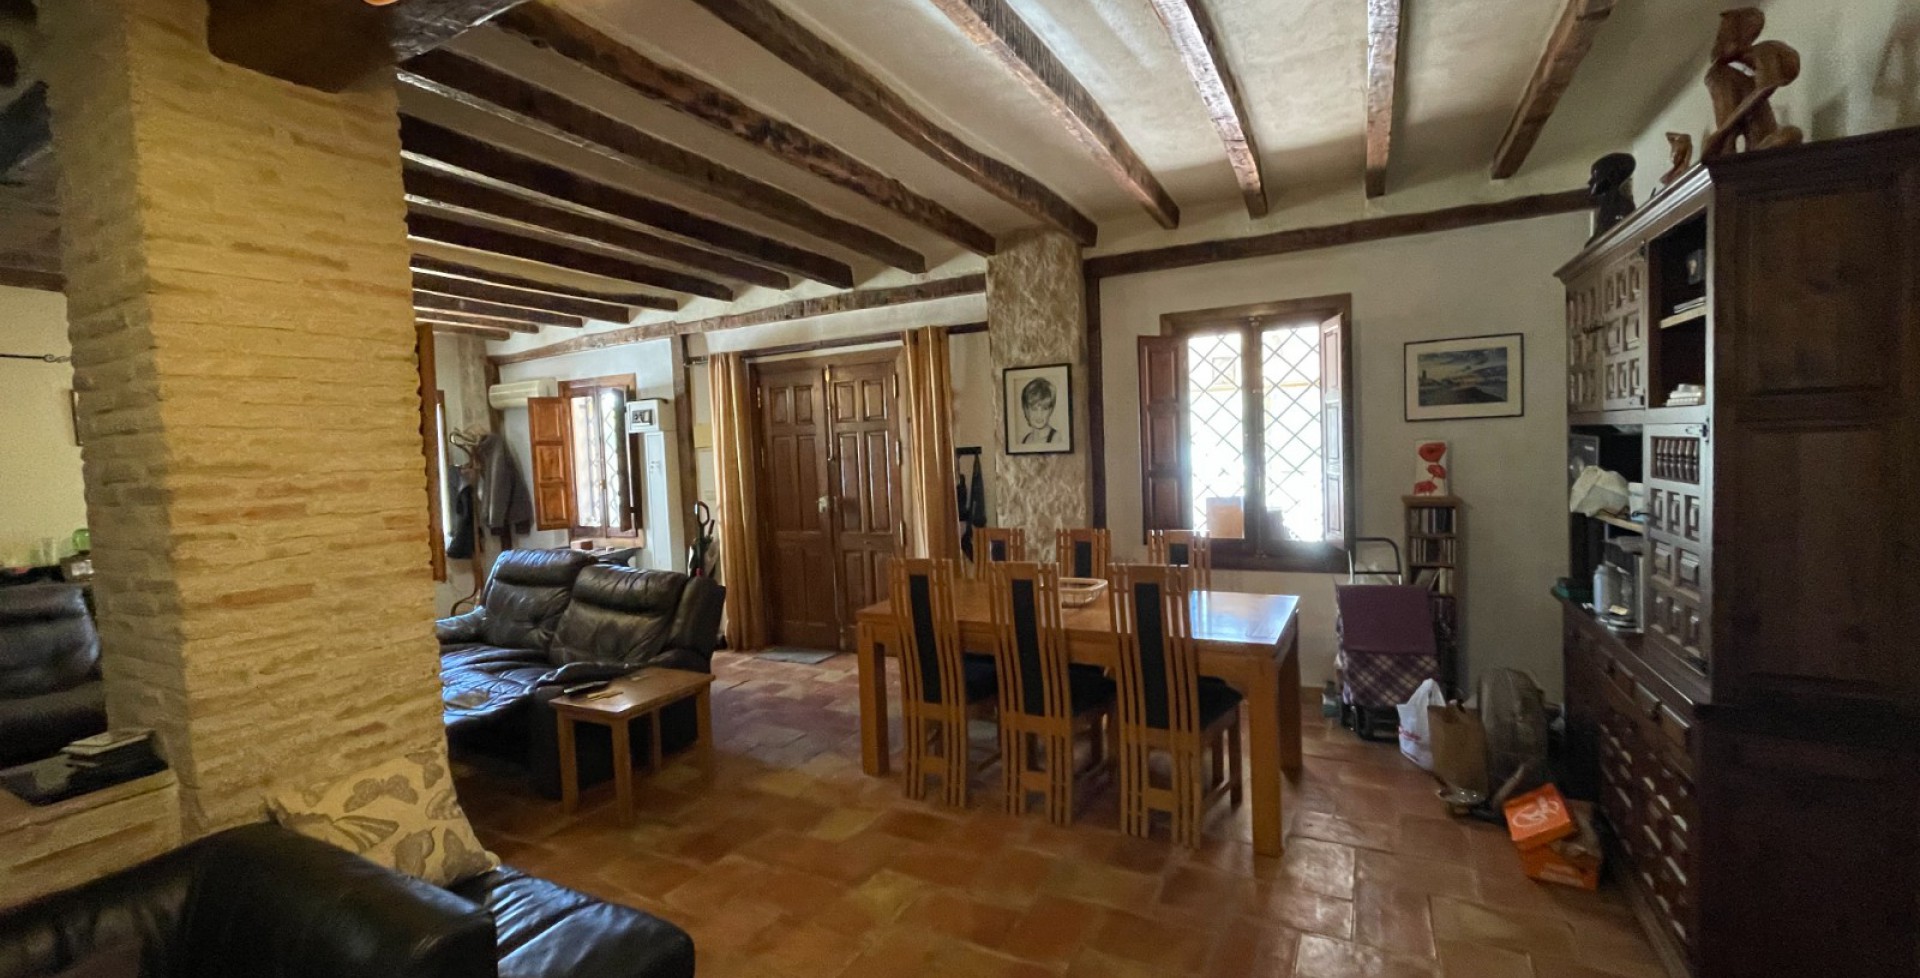 For Sale - Country House - Cieza